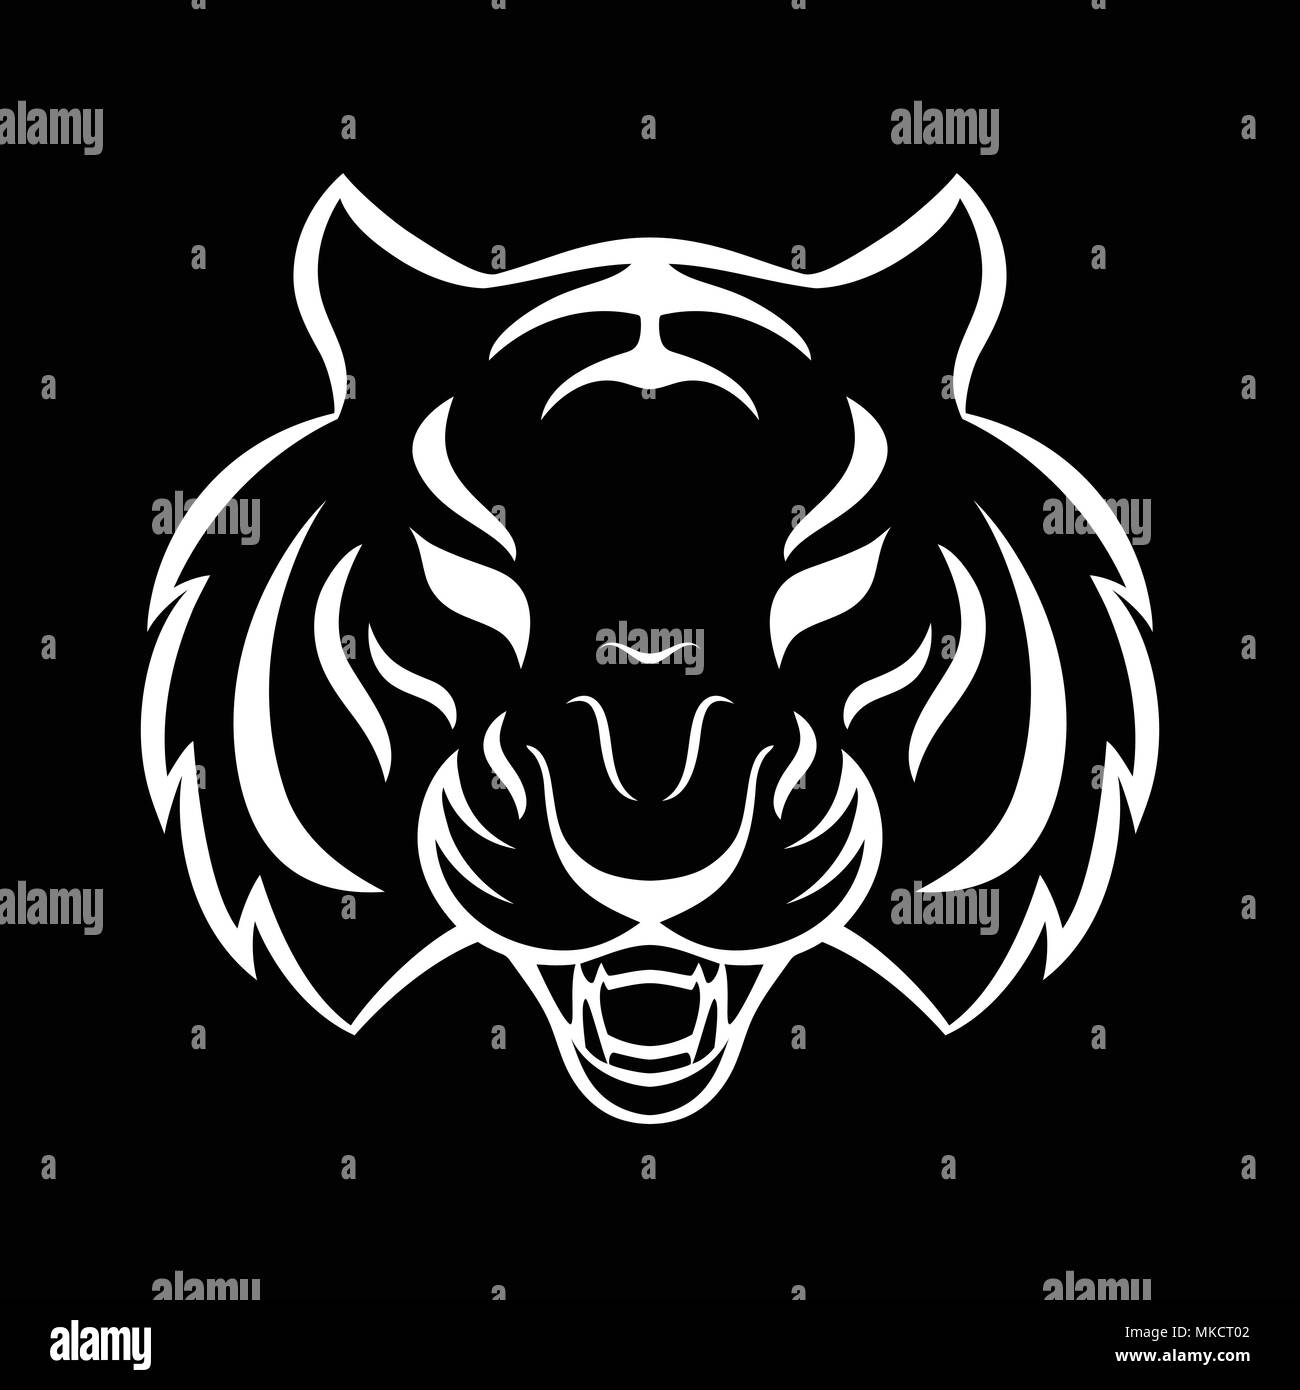 Tiger logo Black and White Stock Photos & Images - Alamy